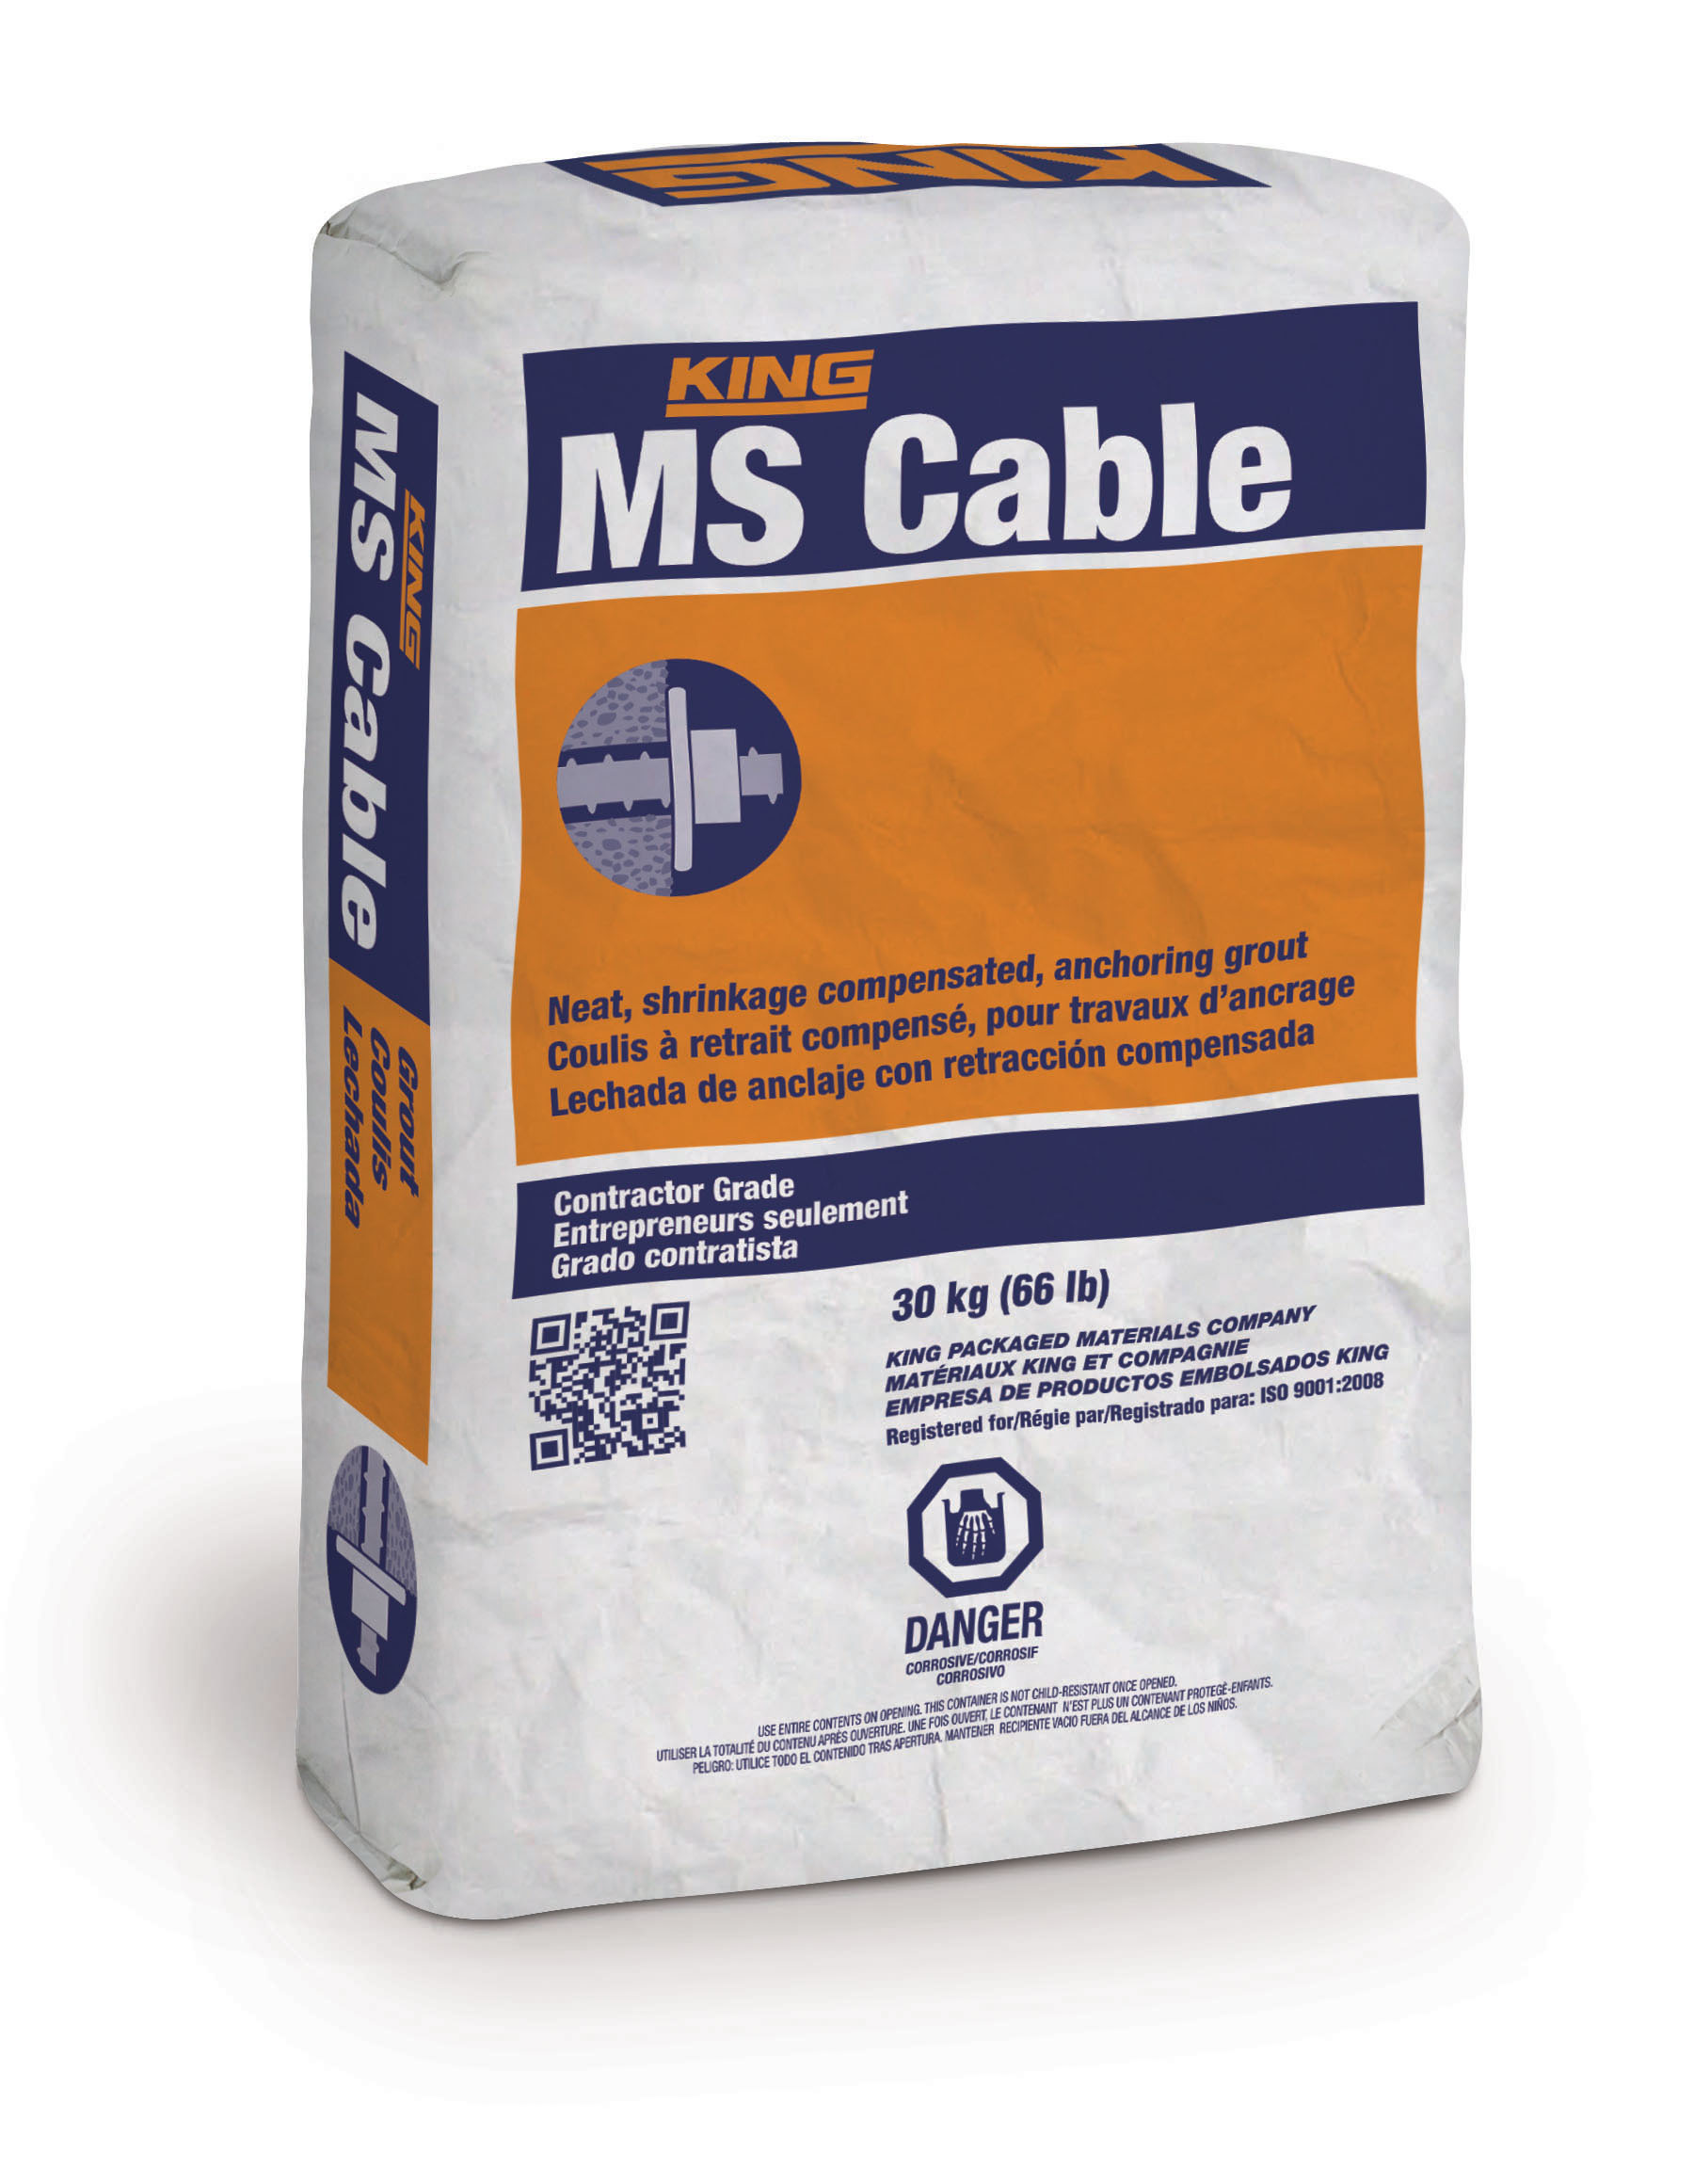 MS Cable to Move from 30 KG Bag to 25 KG Bag